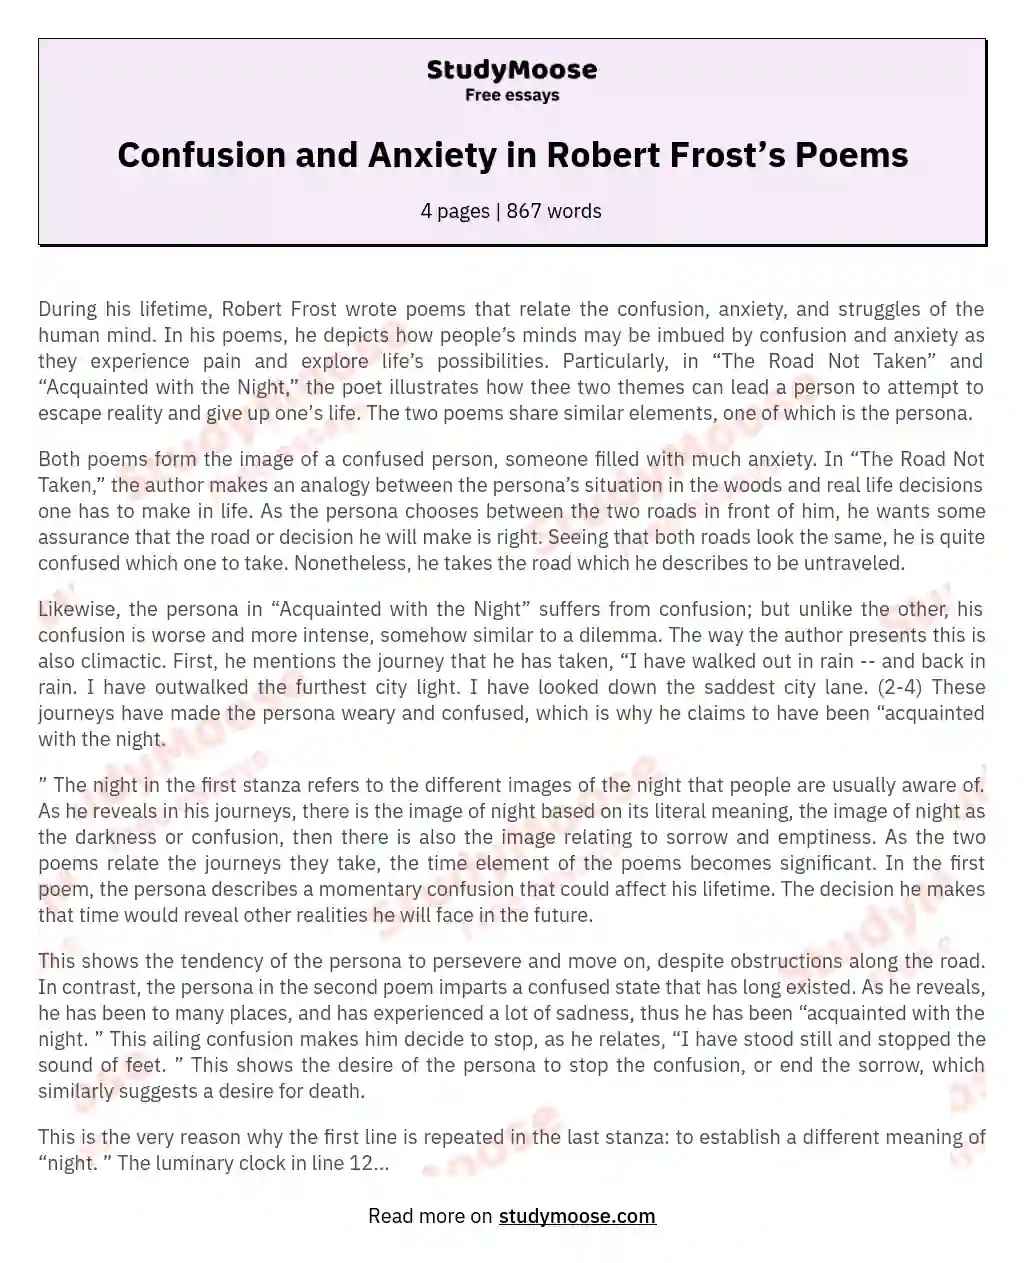 Confusion and Anxiety in Robert Frost’s Poems